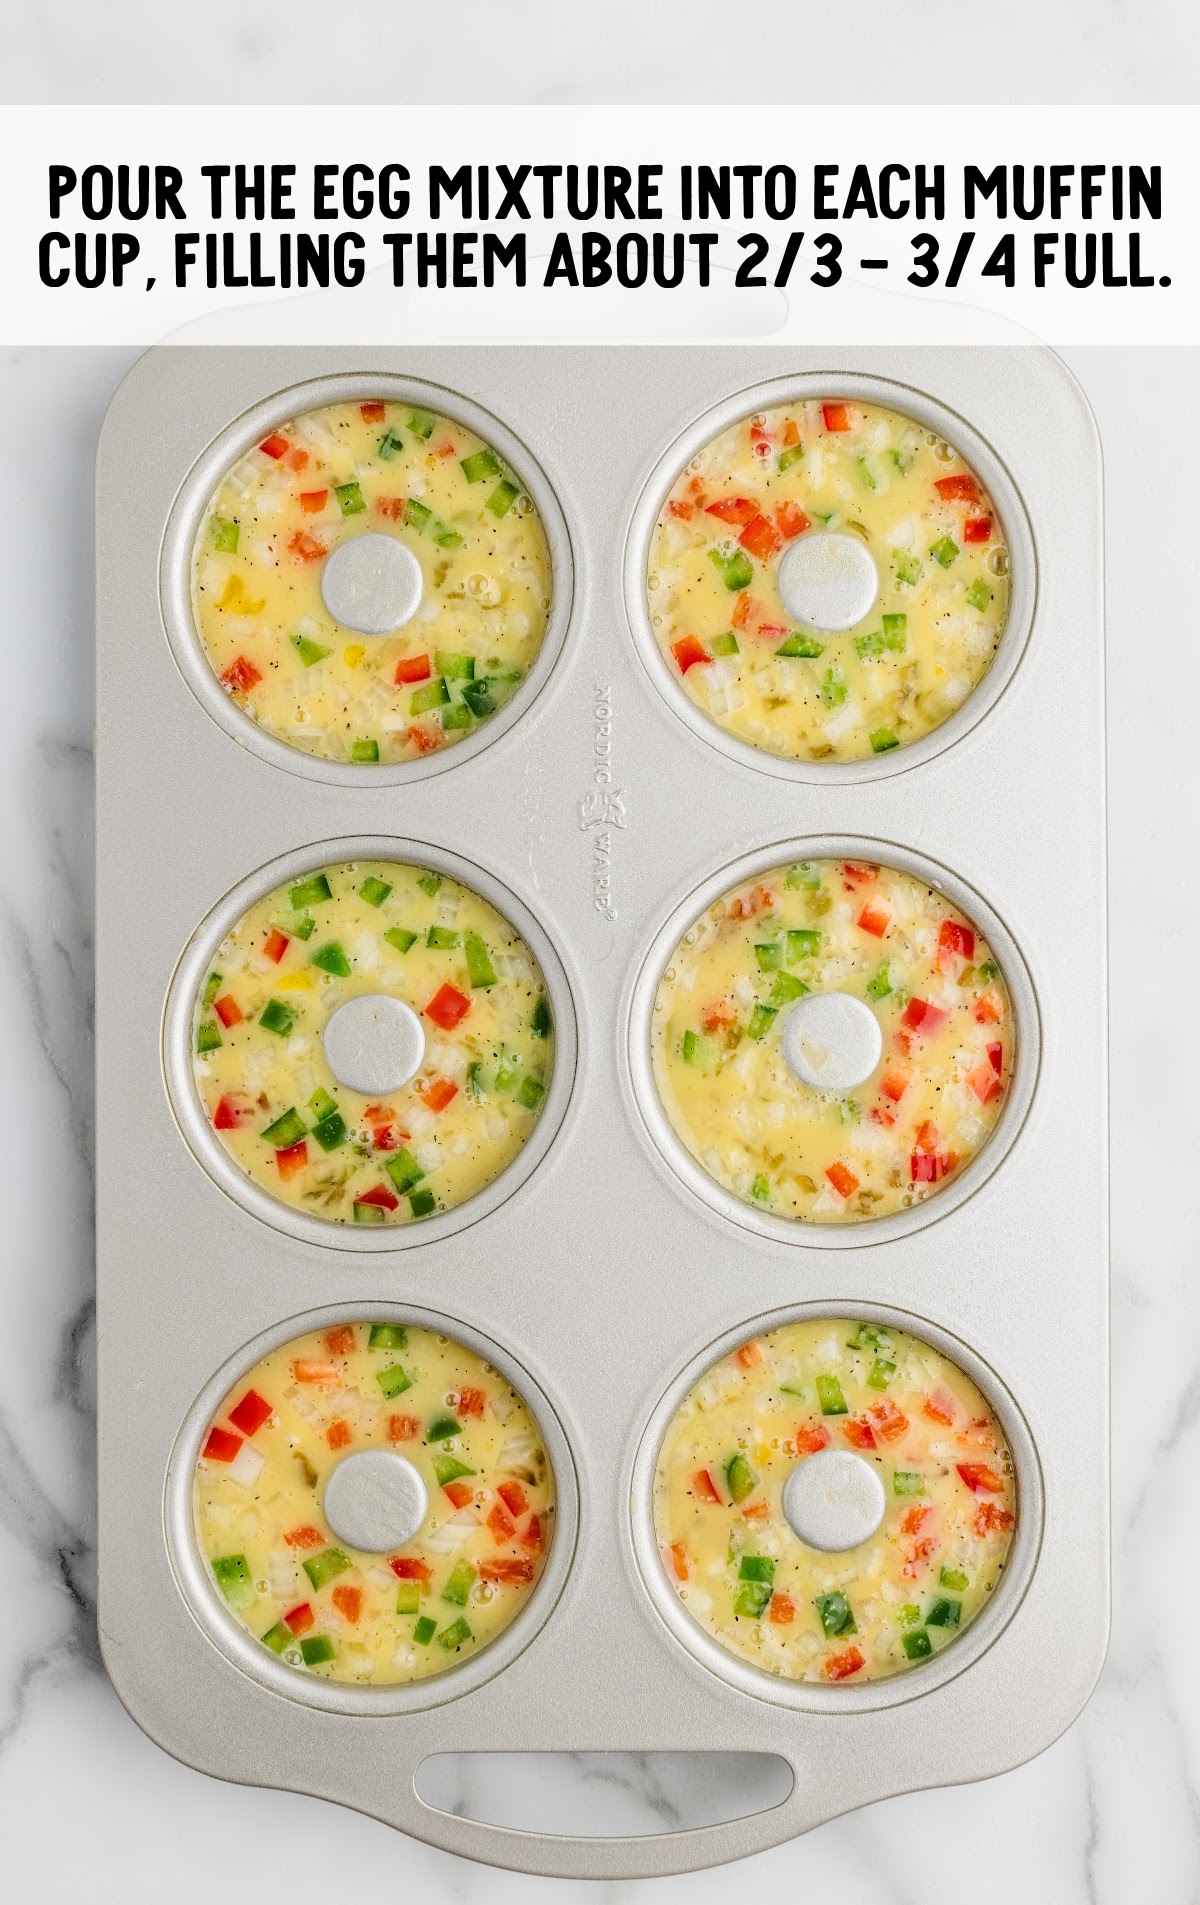 raw eggs, meat, and veggies in muffin tins ready to bake